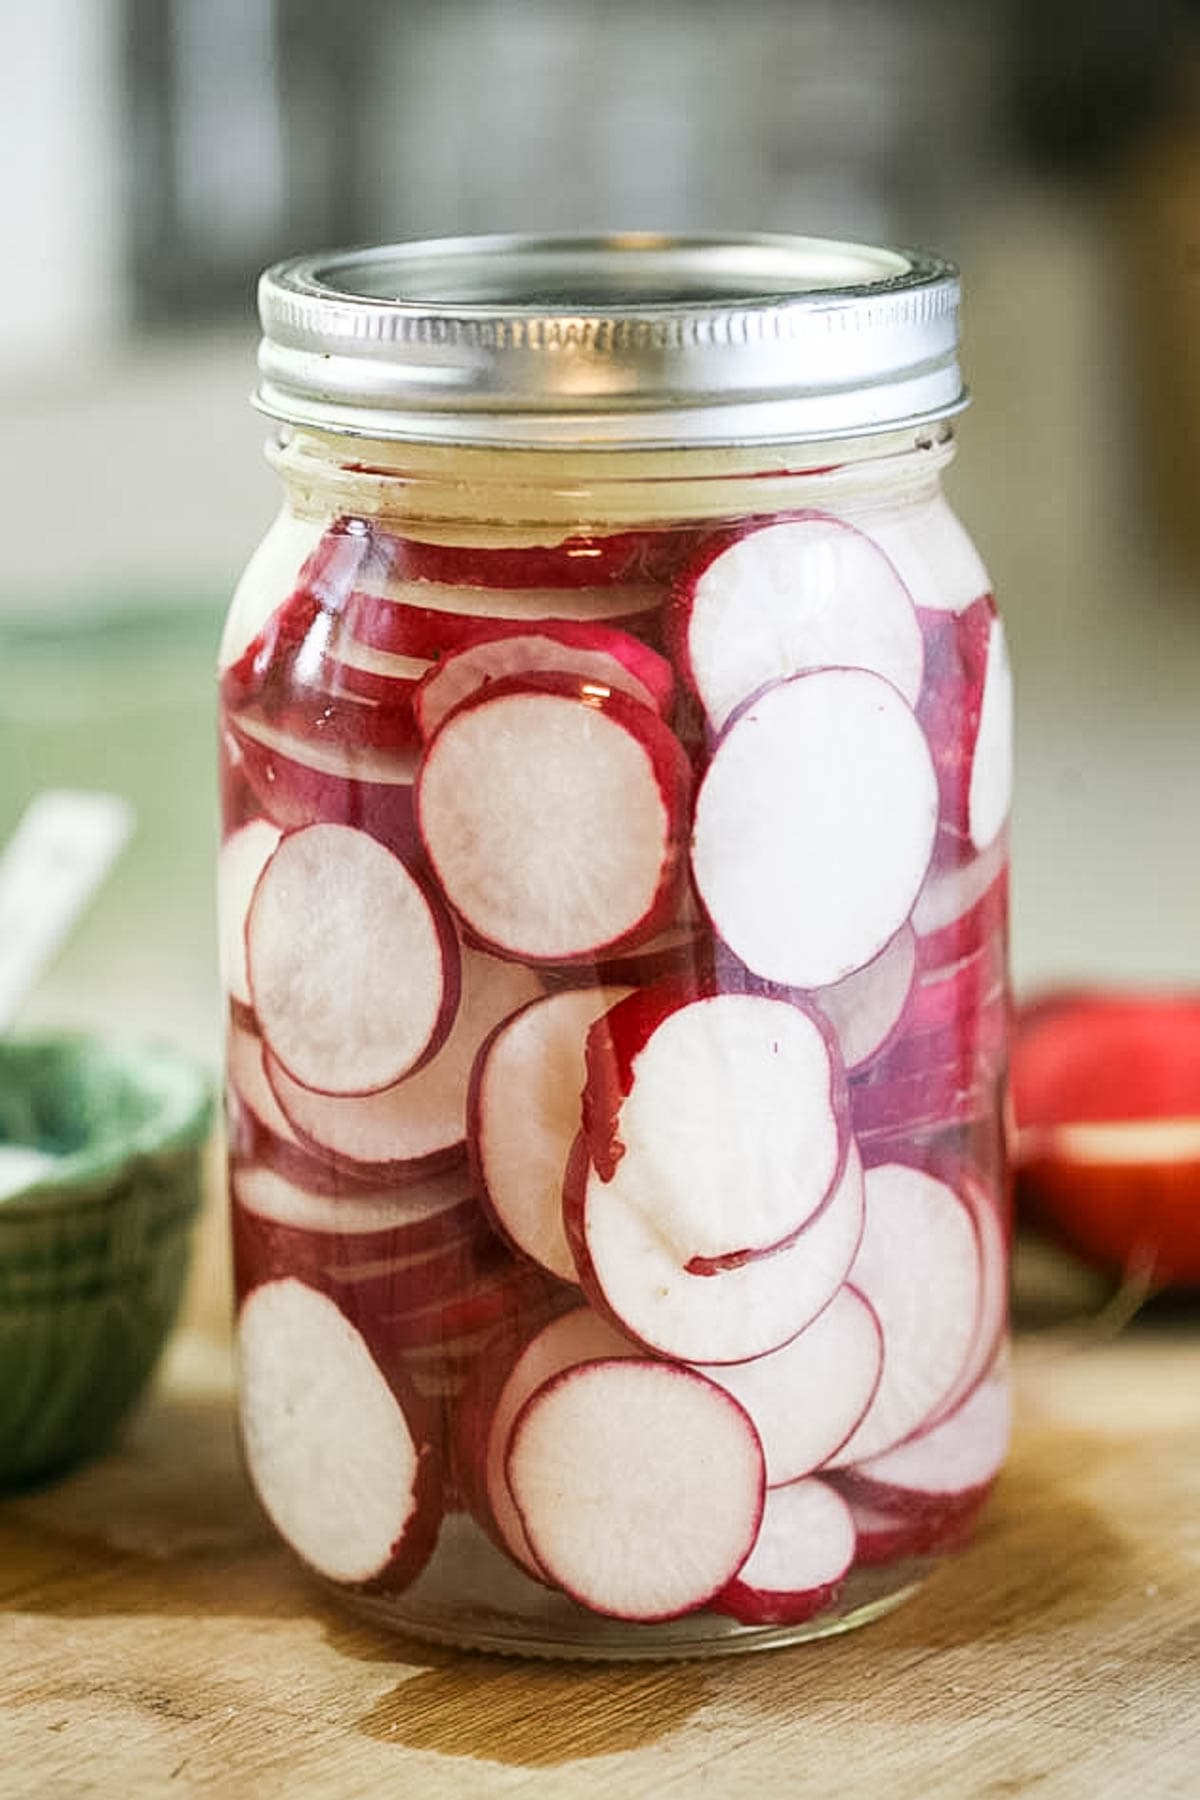 Fermented radish is an easy way to preserve radishes. It takes minutes to put together and the end result is a delicious and healthy snack for the whole family. Lacto fermented radish is not as sharp as raw radish so even the kids love it! 